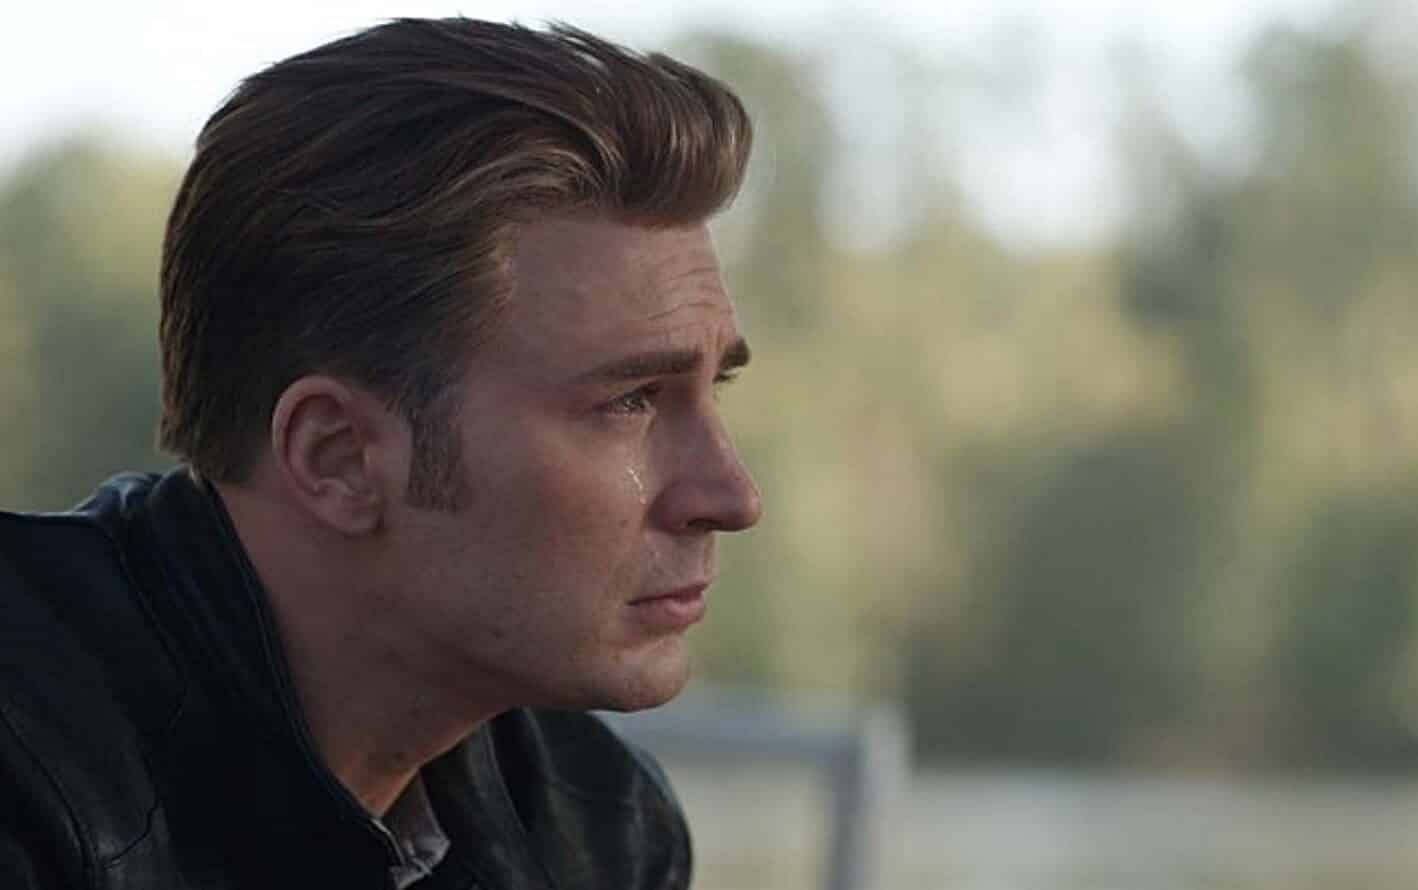 Avengers Endgame: How much was each cast member paid? - PopBuzz